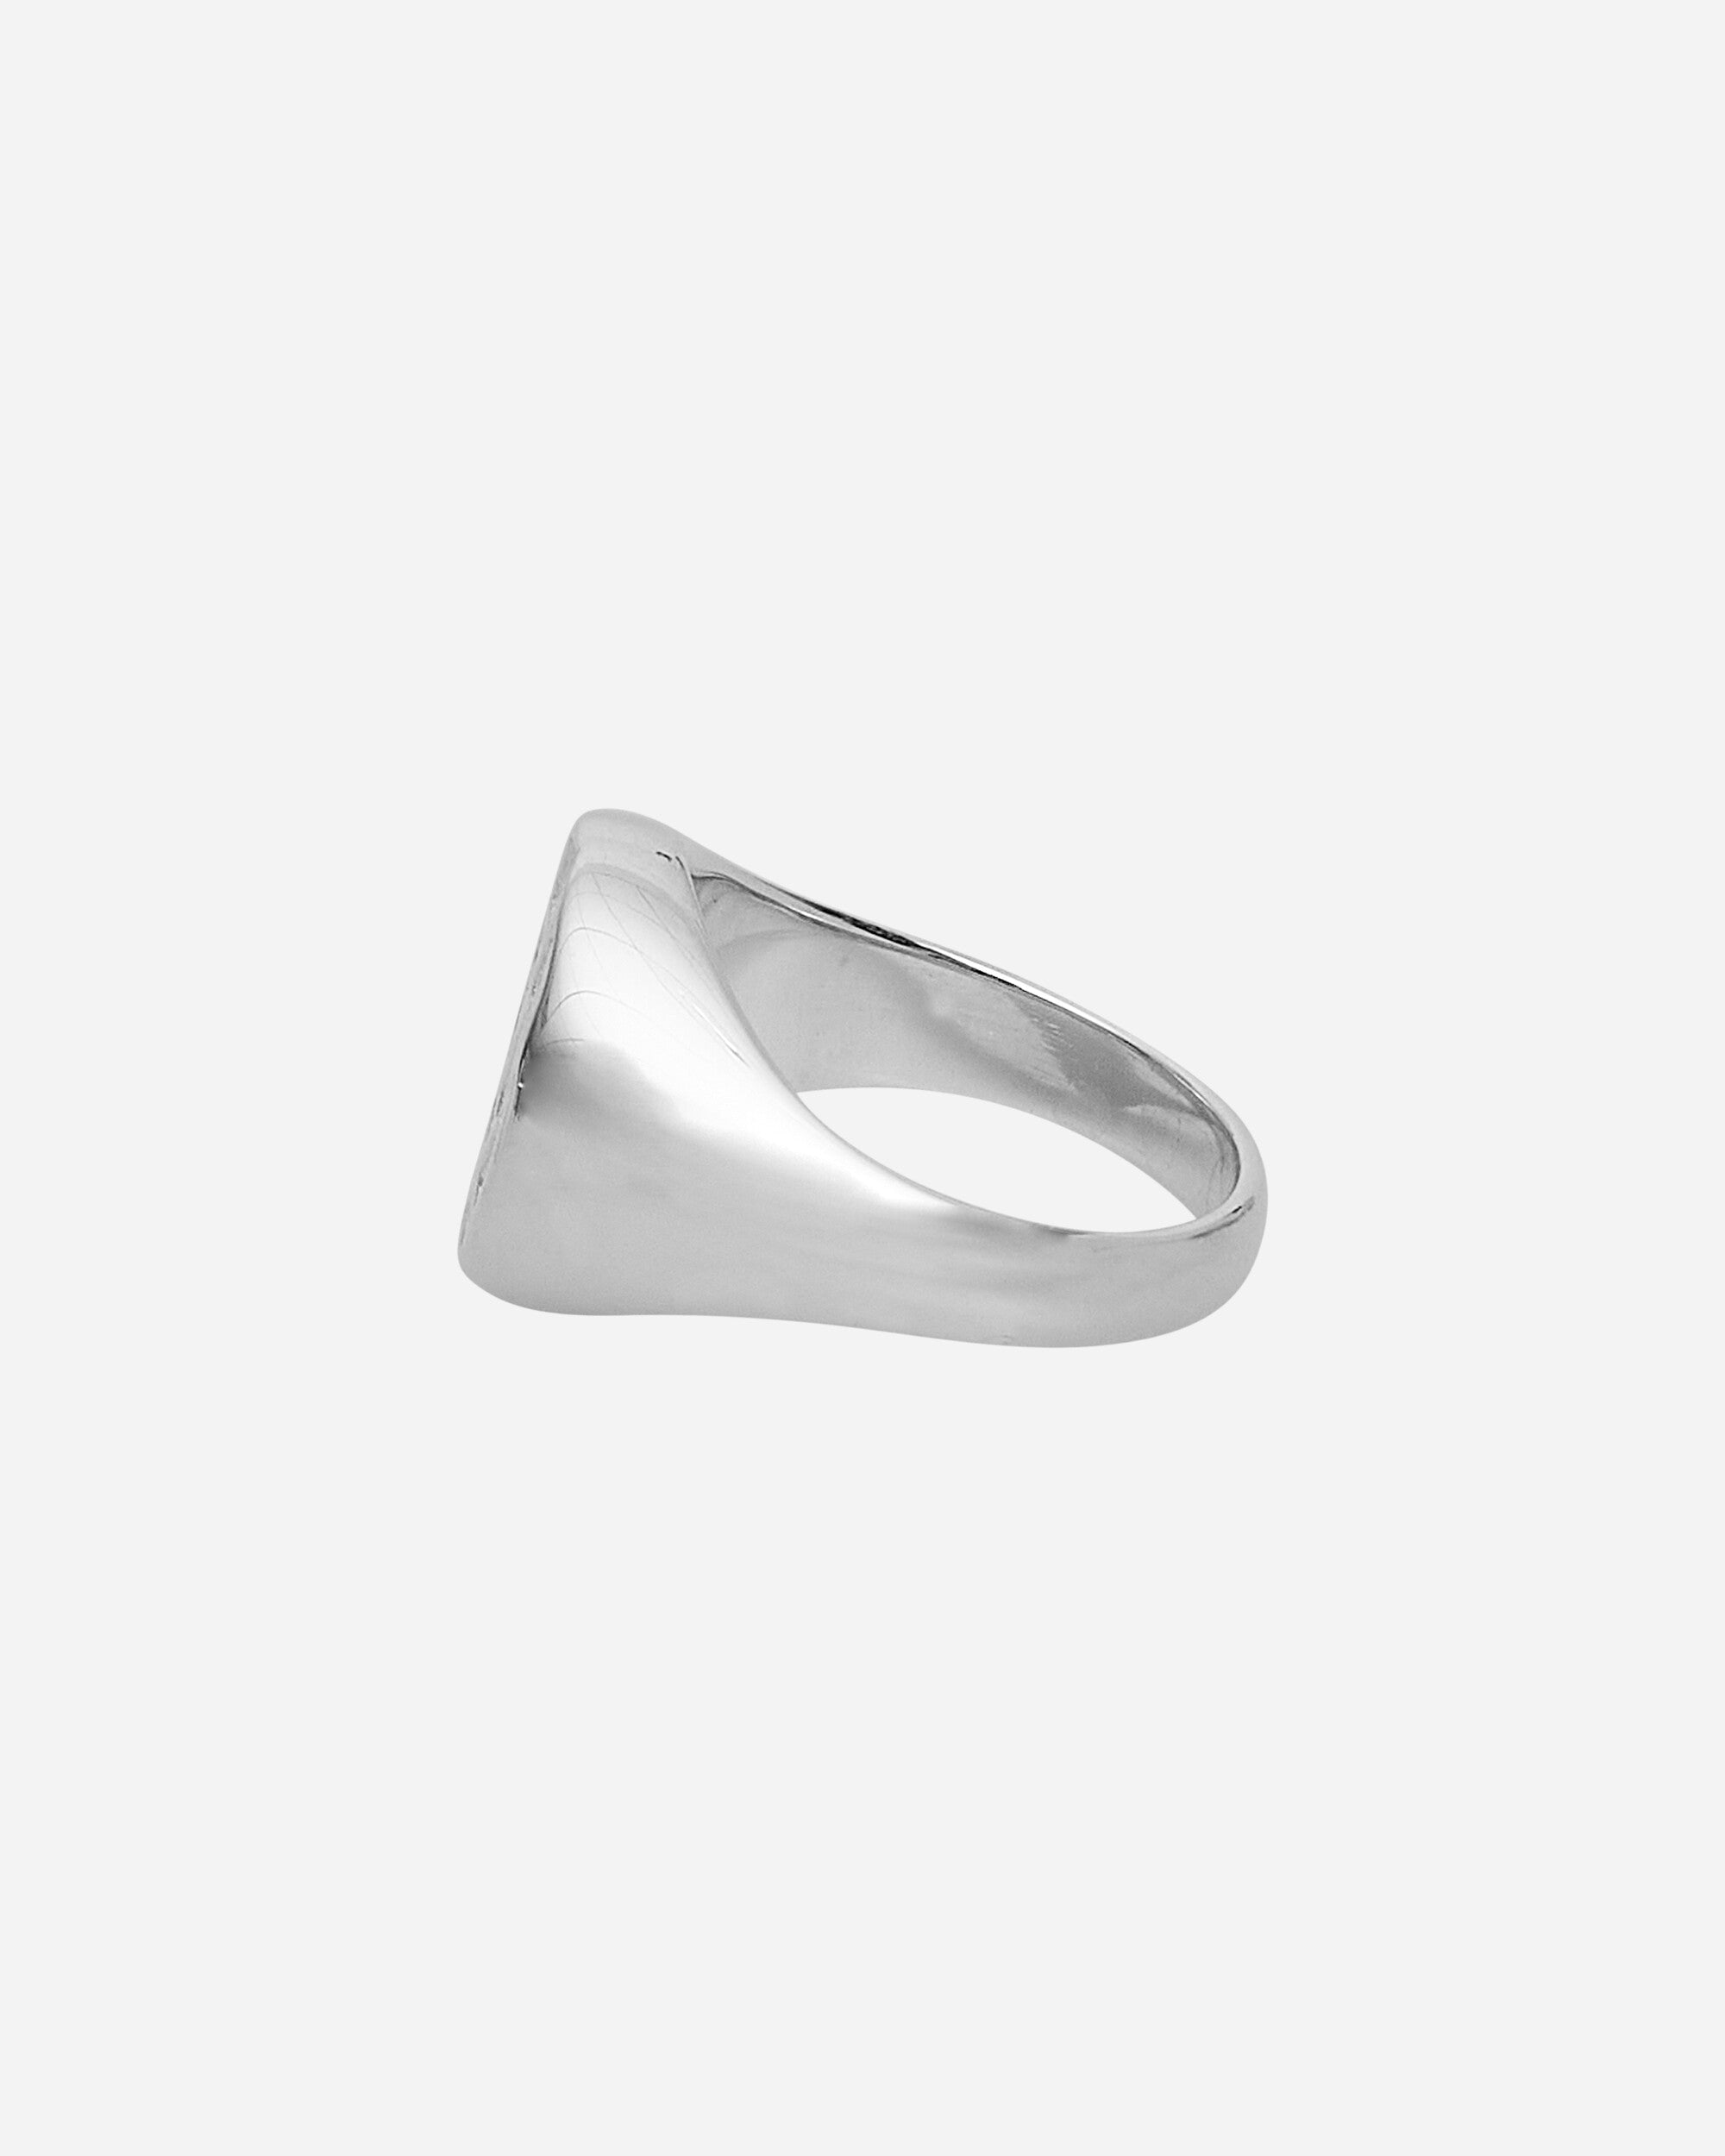 Cracked Melon Signet Ring Silver